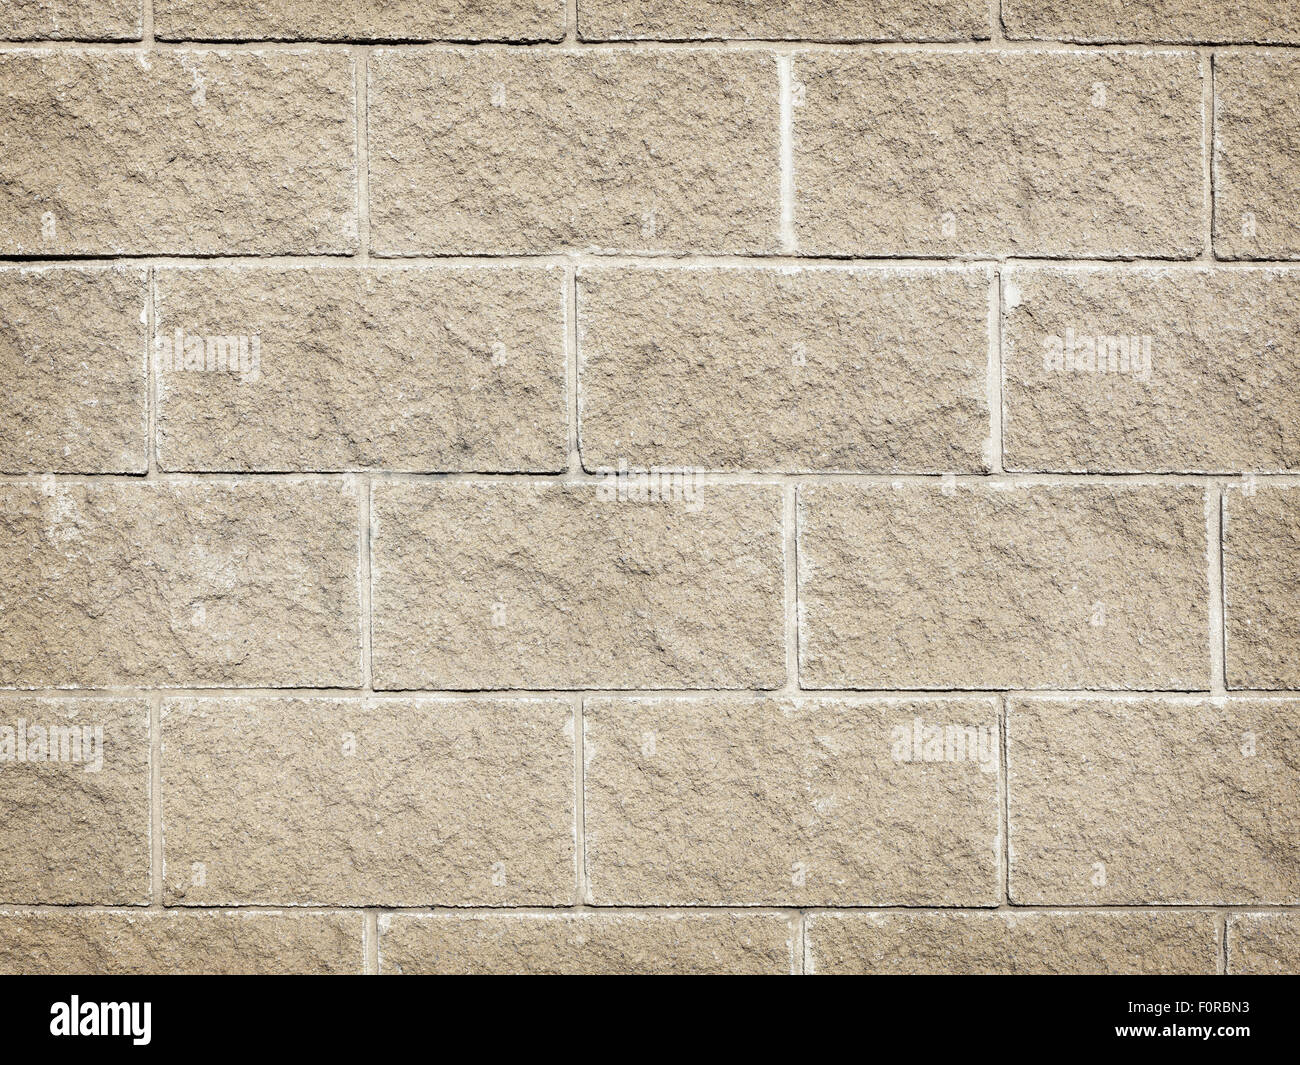 Close up shot of stone wall ideal for use as a background image with copy space for the designer. Stock Photo